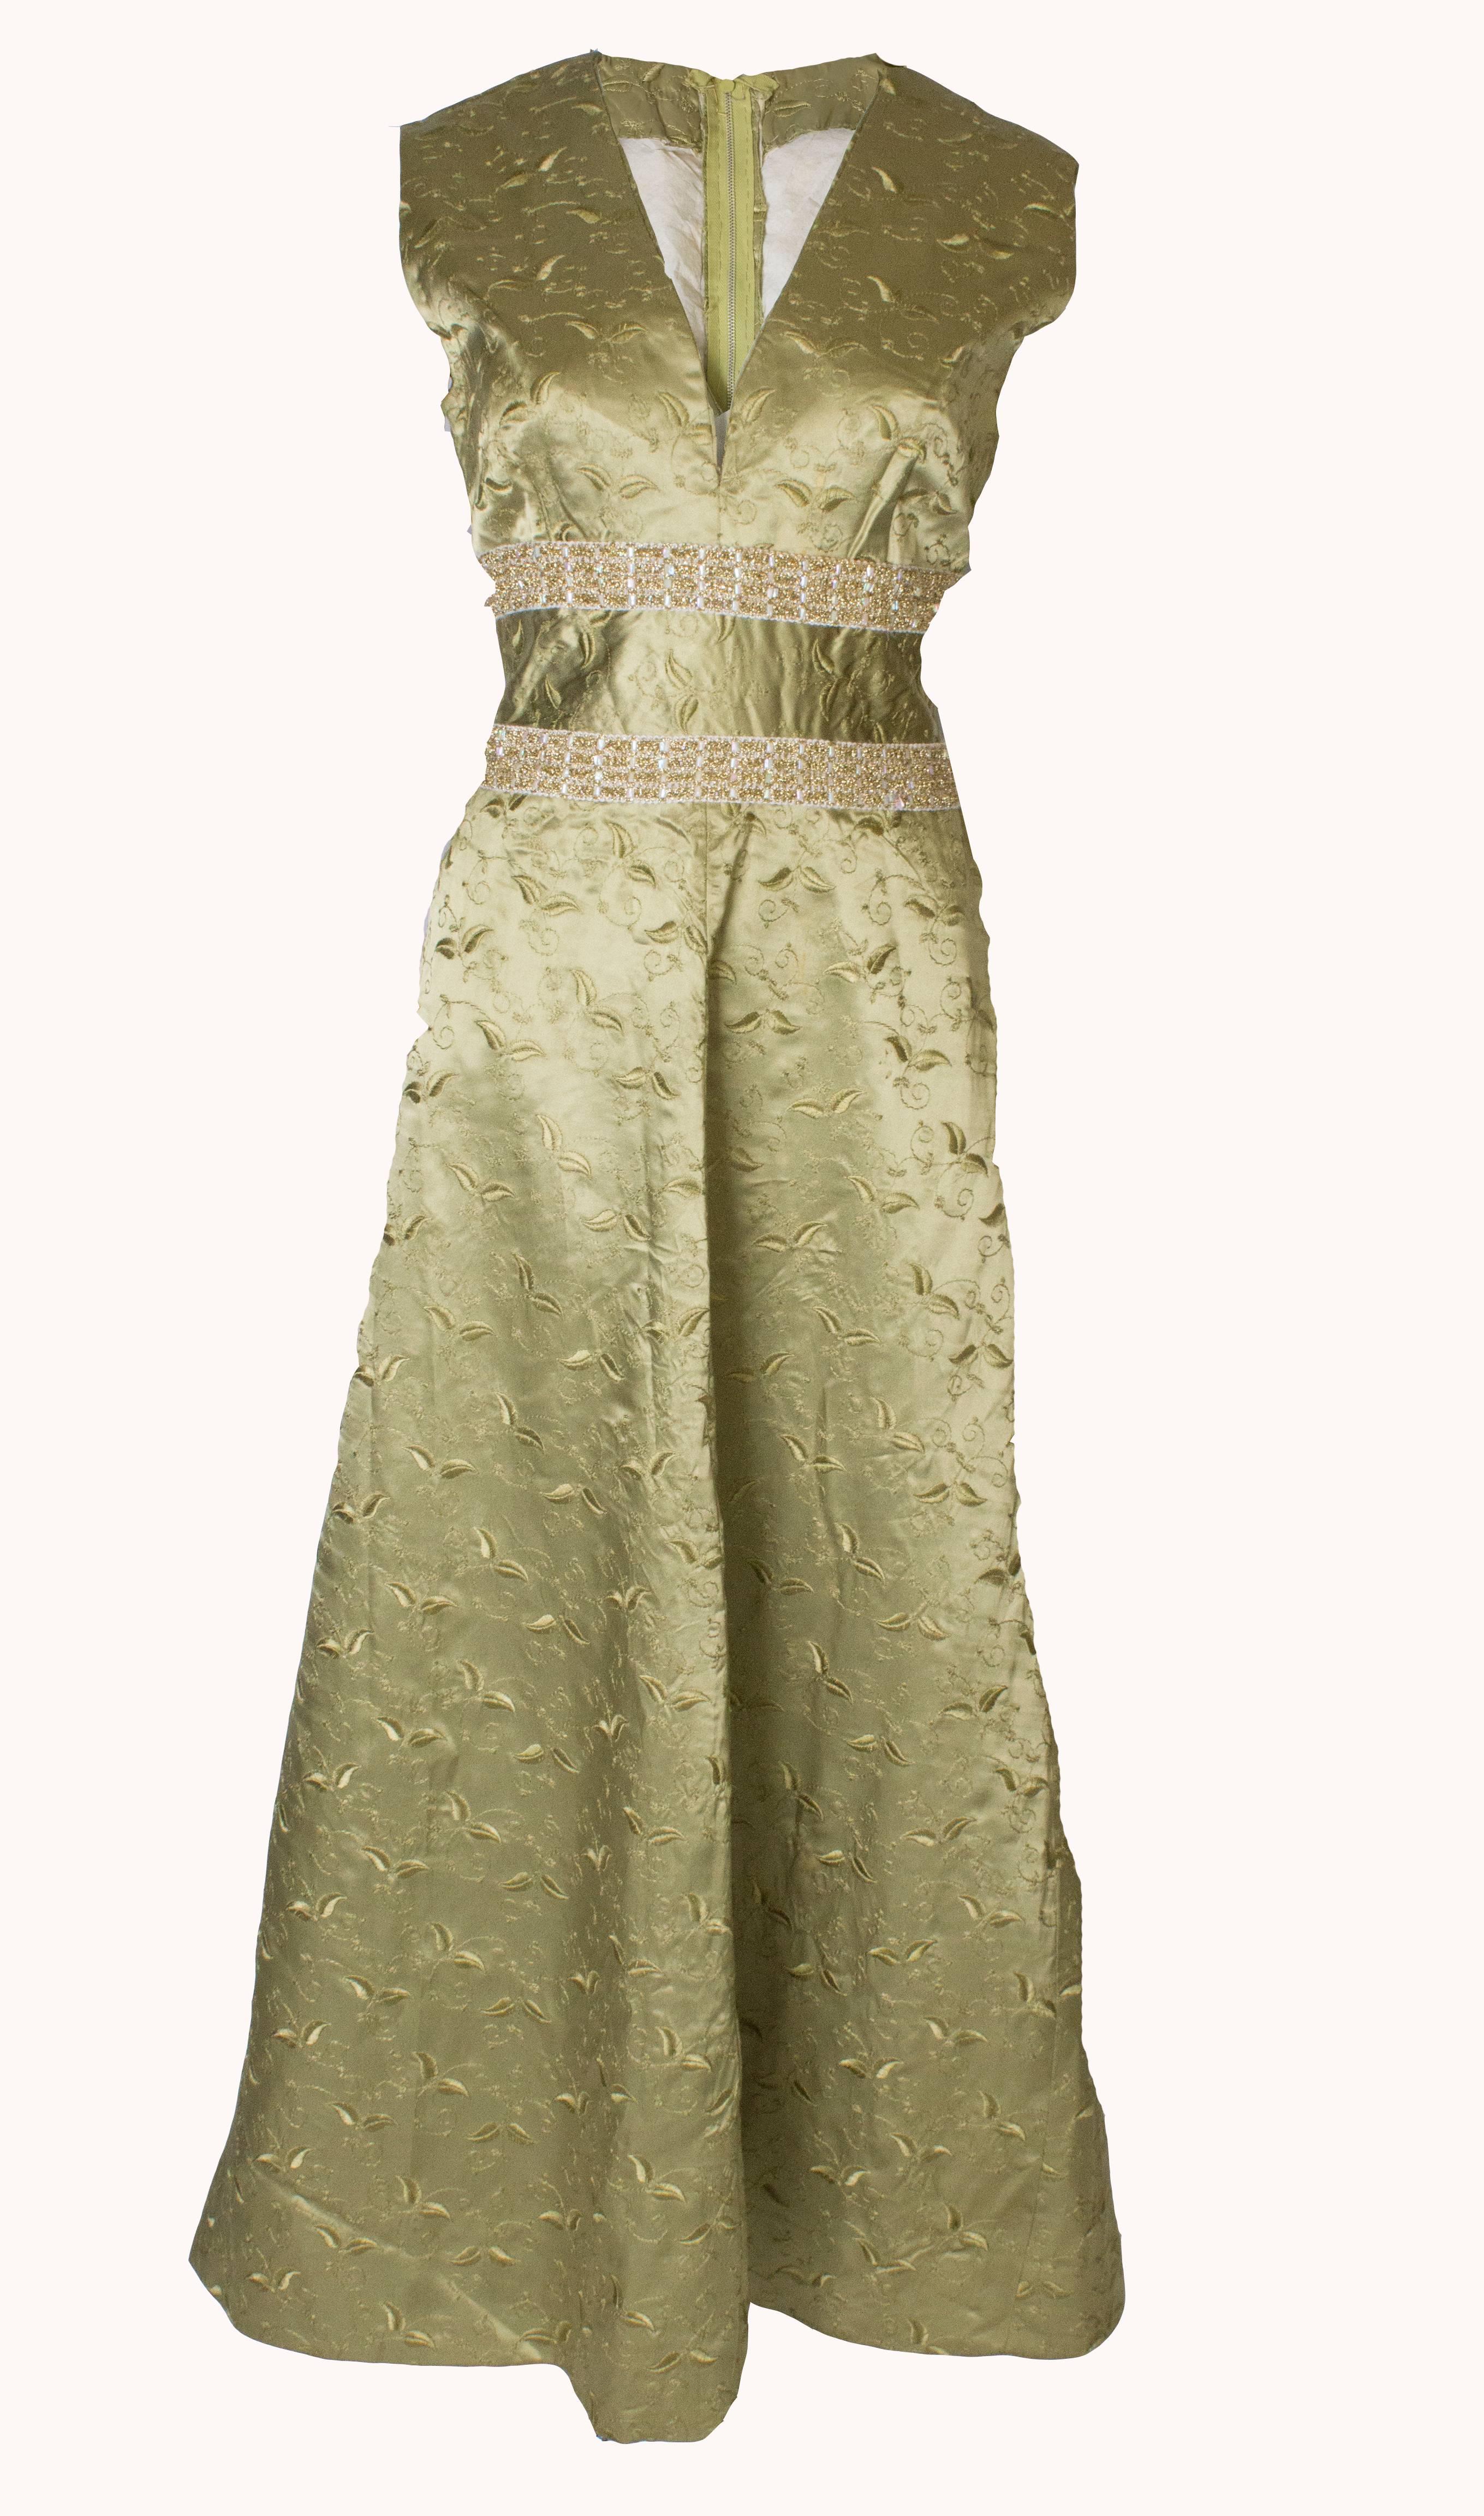 An elegant sage green vintage gown from the 1960s  in a silk mix fabric with embroidery.  The vintage dress  is  sleaveless and has a v neckline, central back zip and two rows of detail.